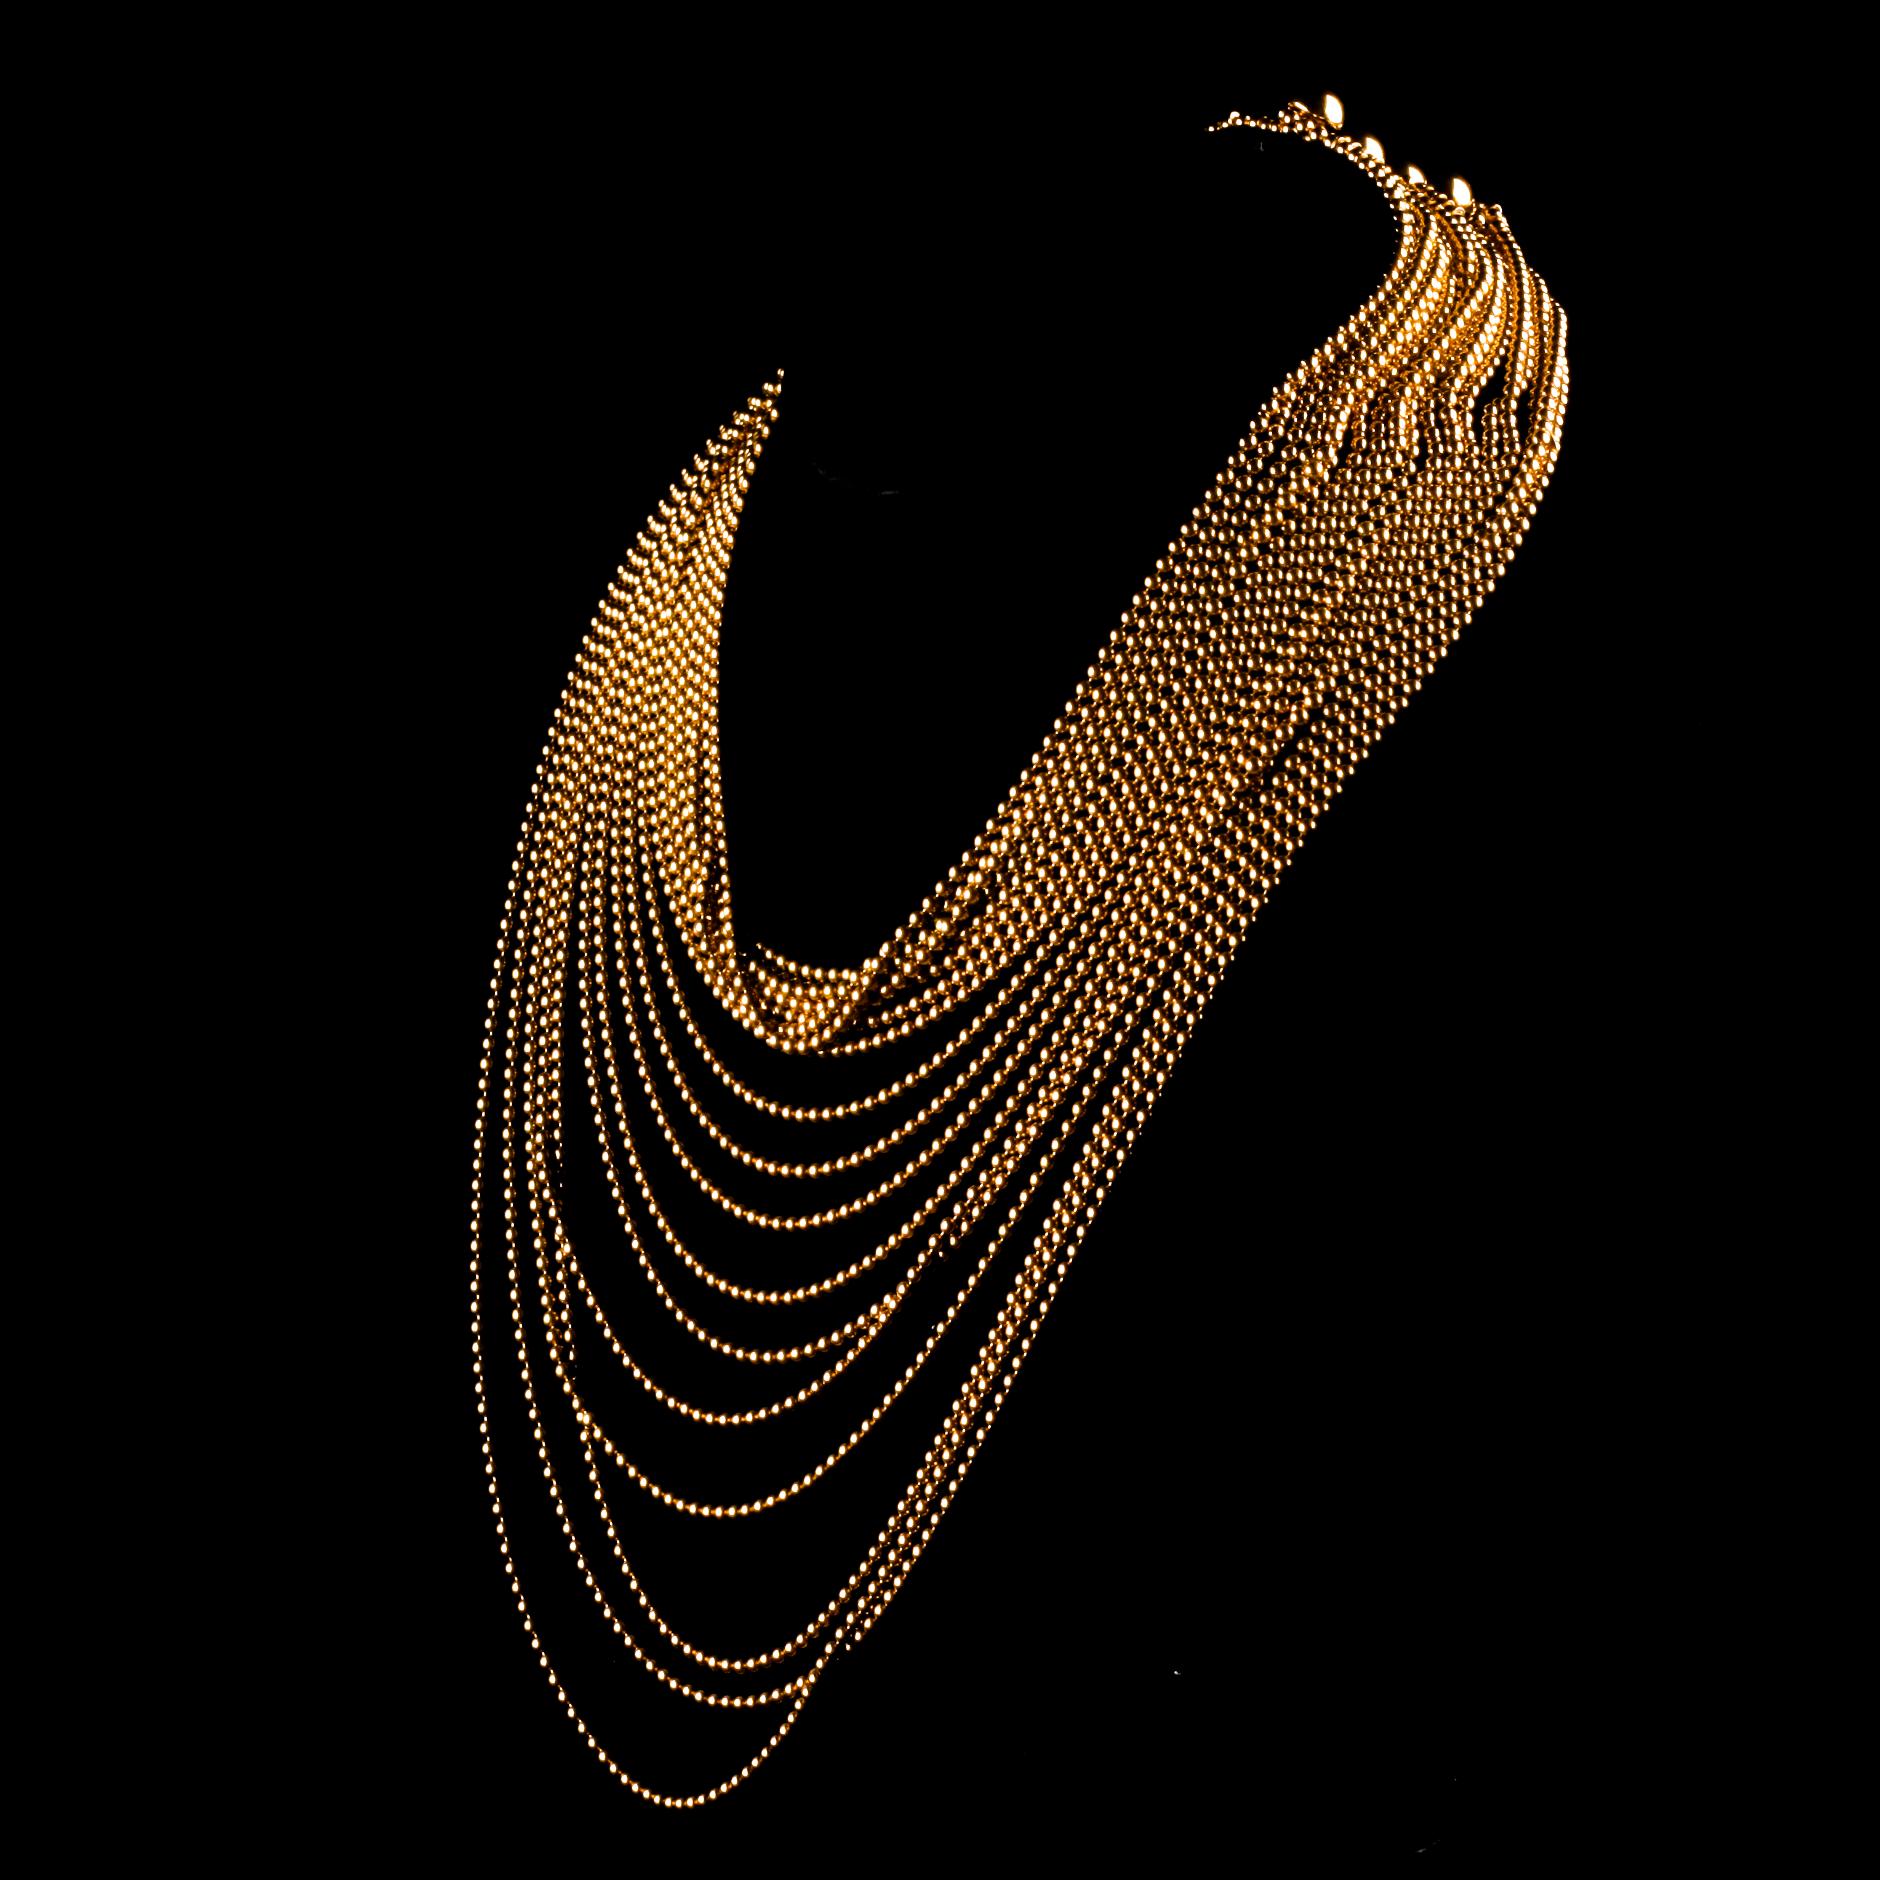 Gorgeous Vintage Gold Necklace from Cartier
Issued in the late 1990s
Features 18 rows of lengthening 18k Yellow Gold bead chains to create a draping bib effect
Approximately 14